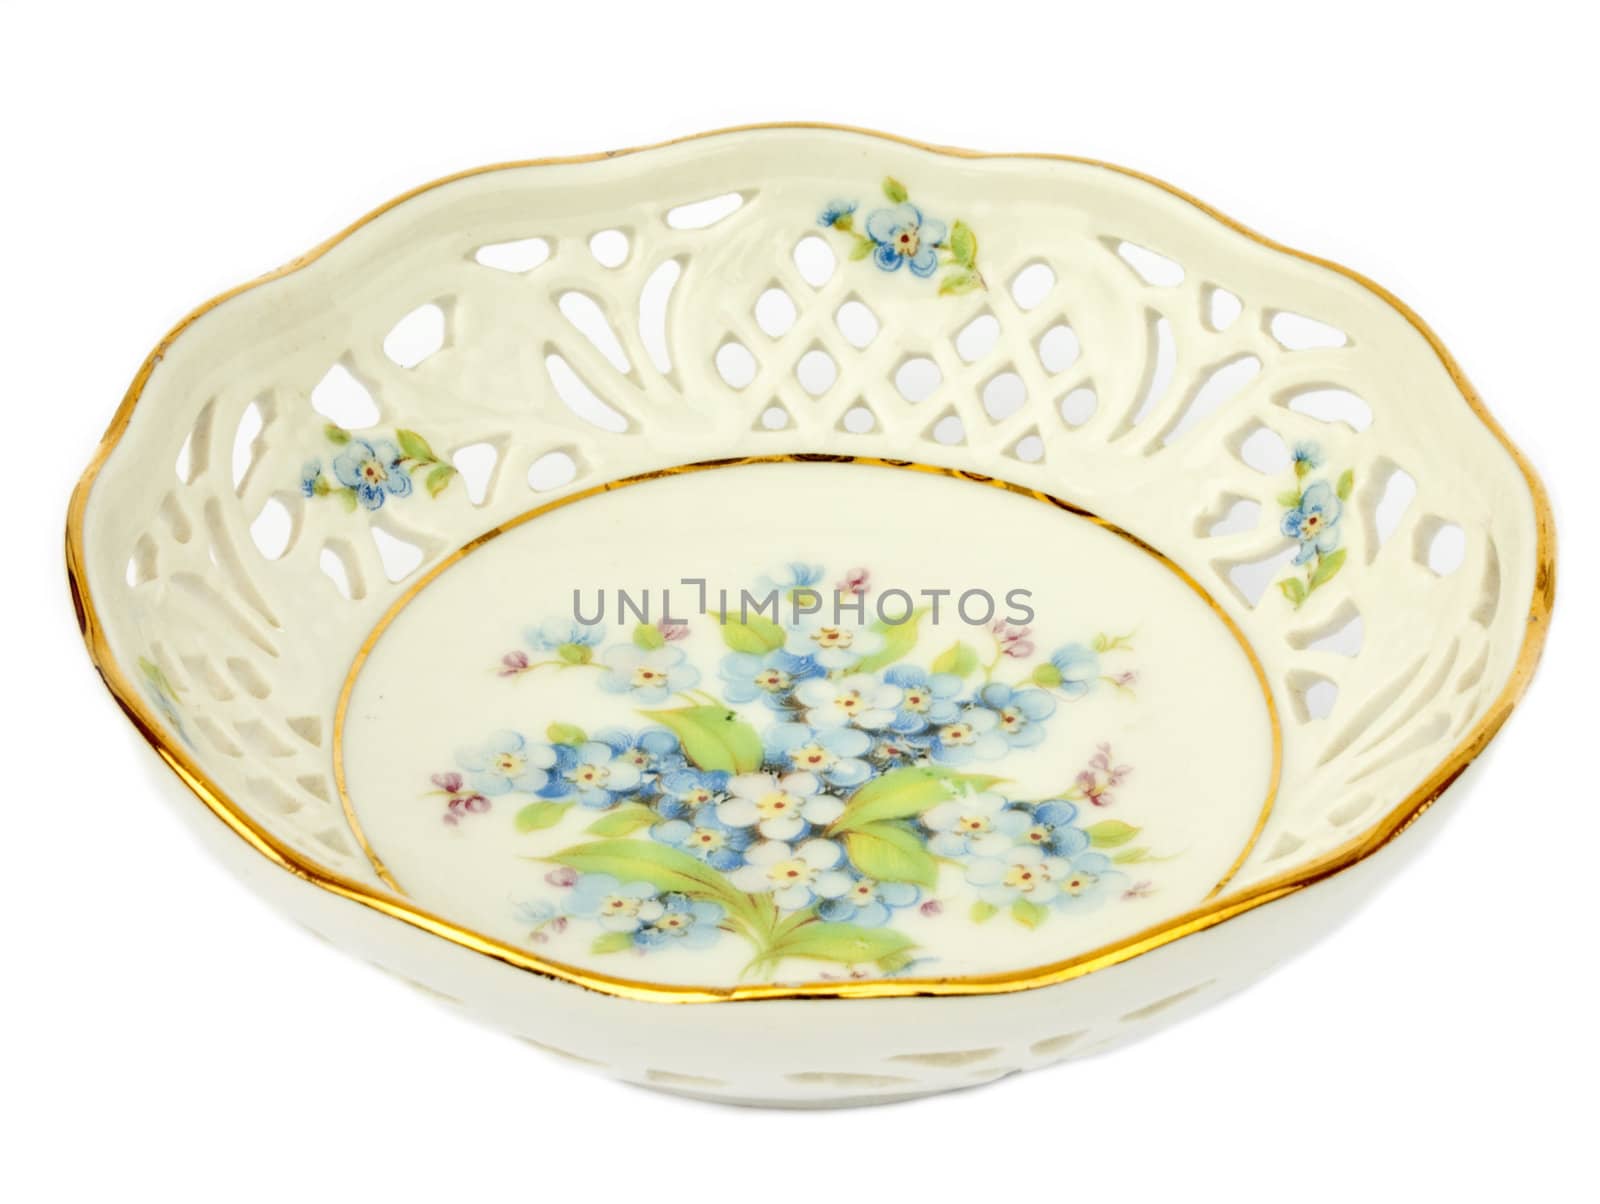 Old antique white porcelain bowl painted with blue and pink forget-me-nots